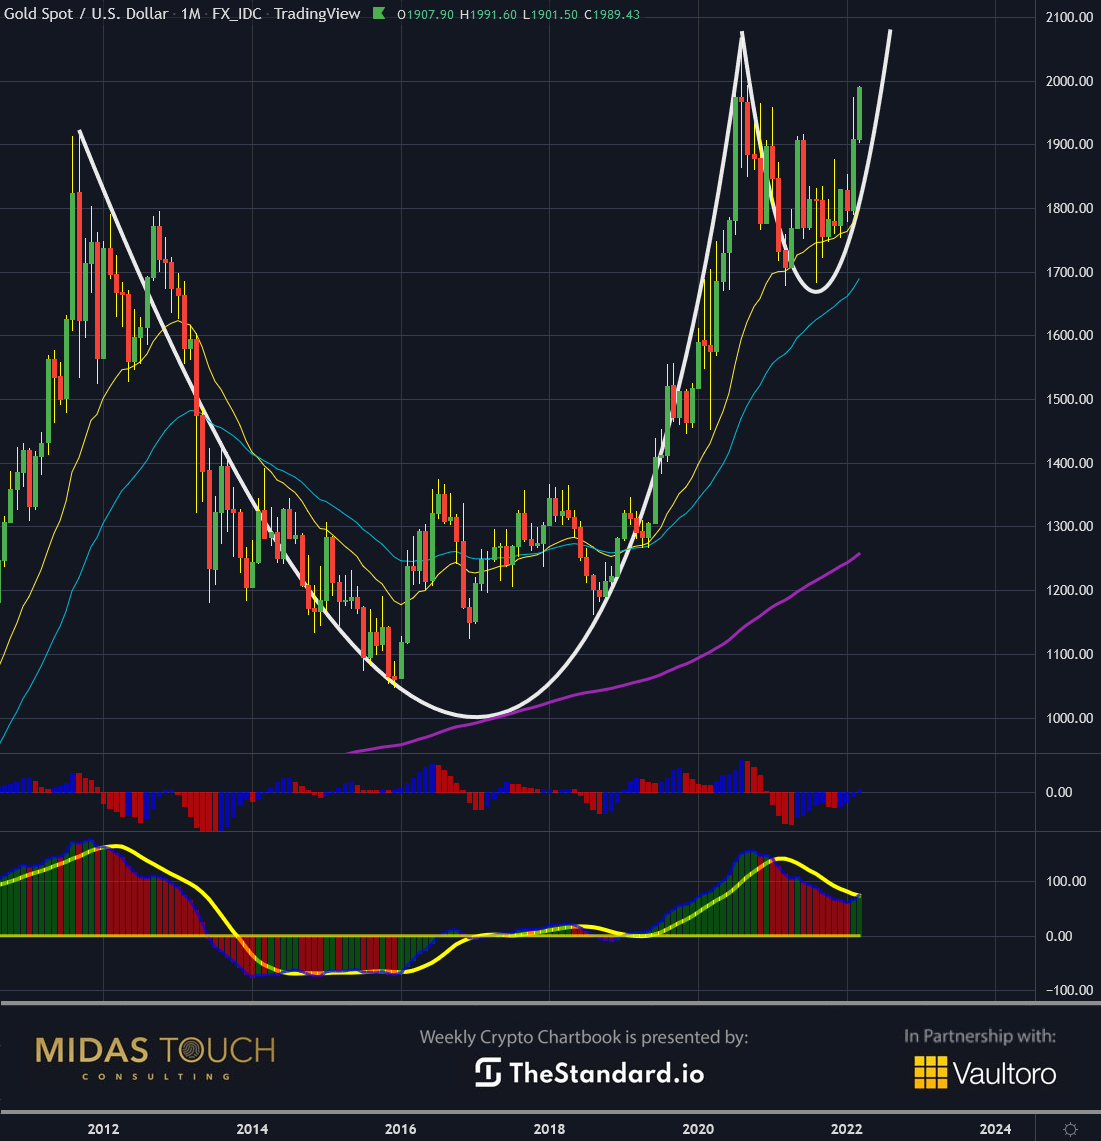 Gold in US Dollar, monthly chart as of March 7th, 2022. Bitcoins image boost